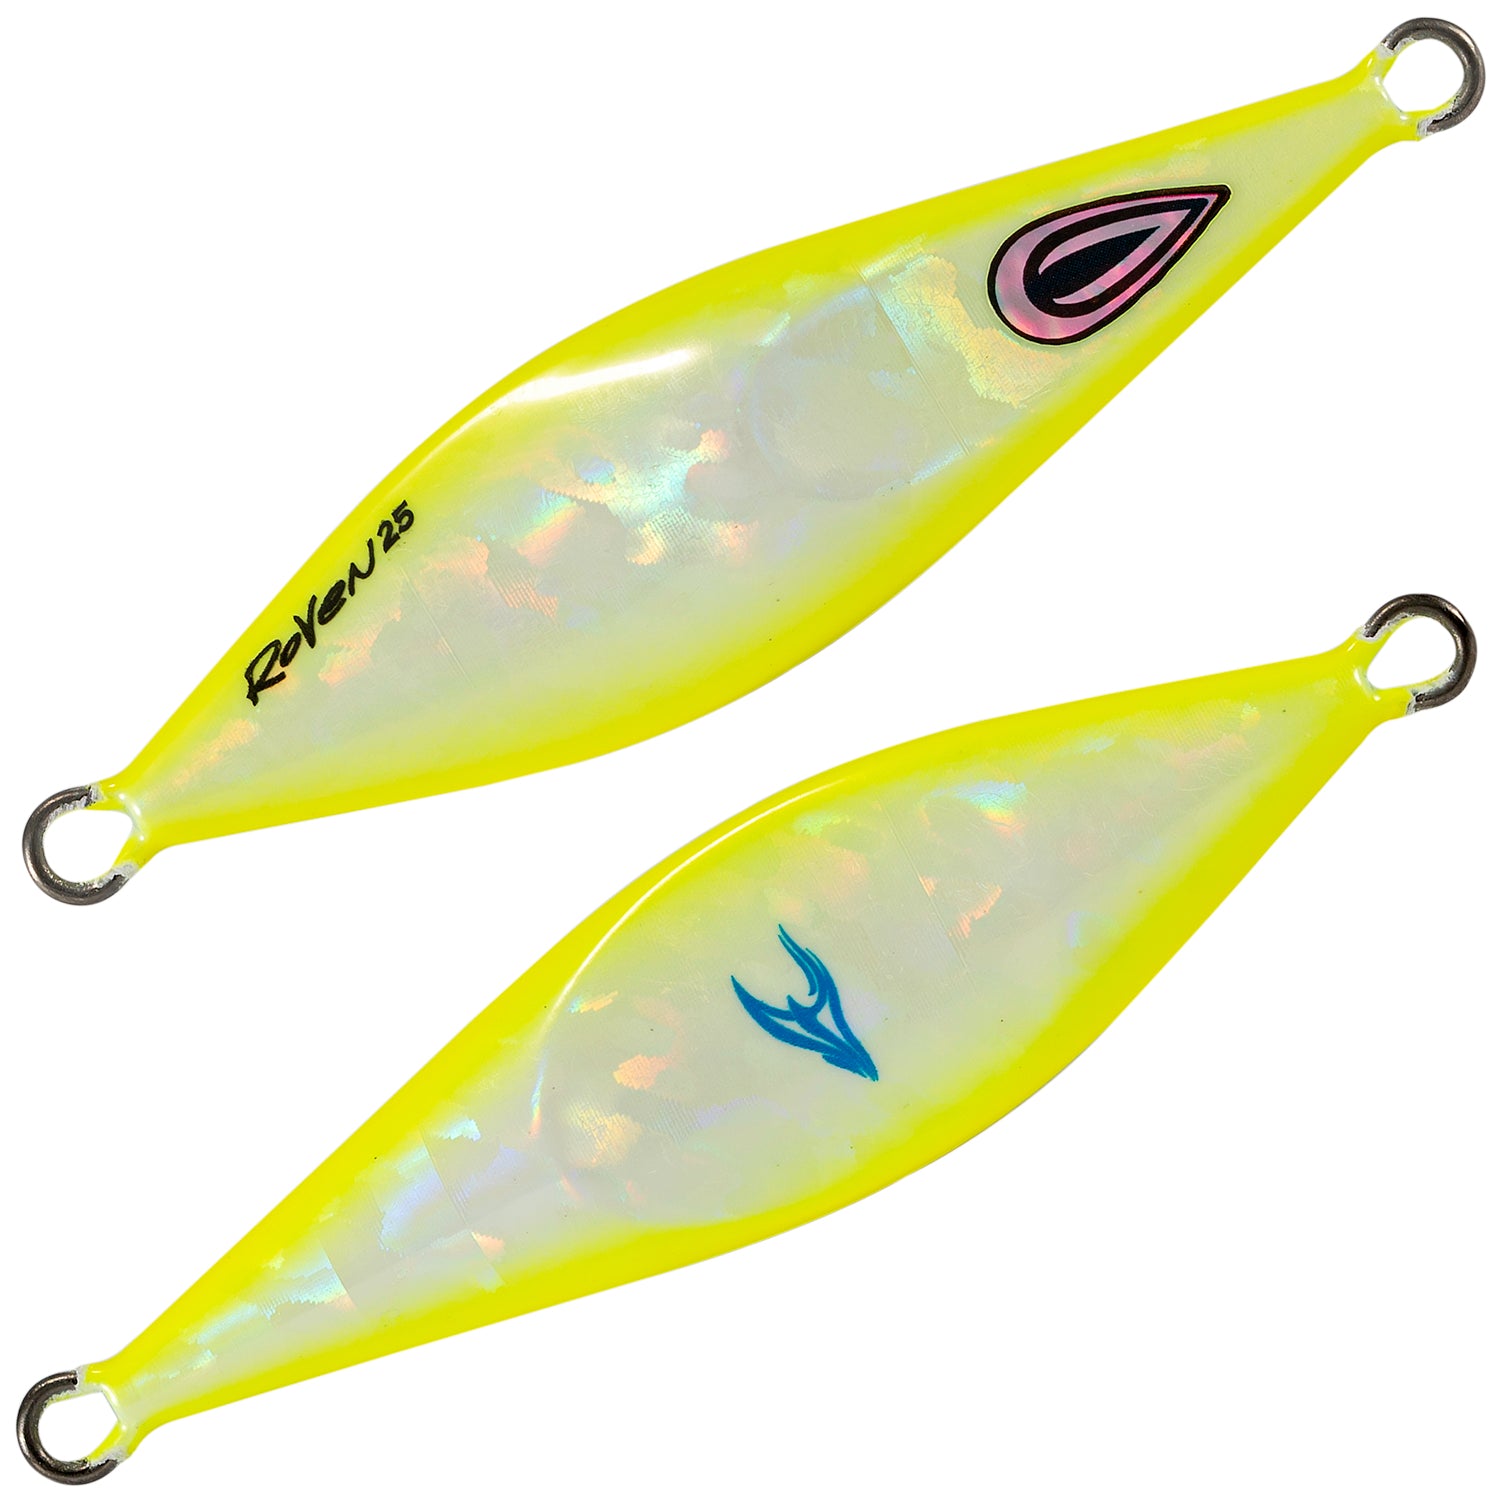 Oceans Legacy Roven Jig Rigged 15g 7